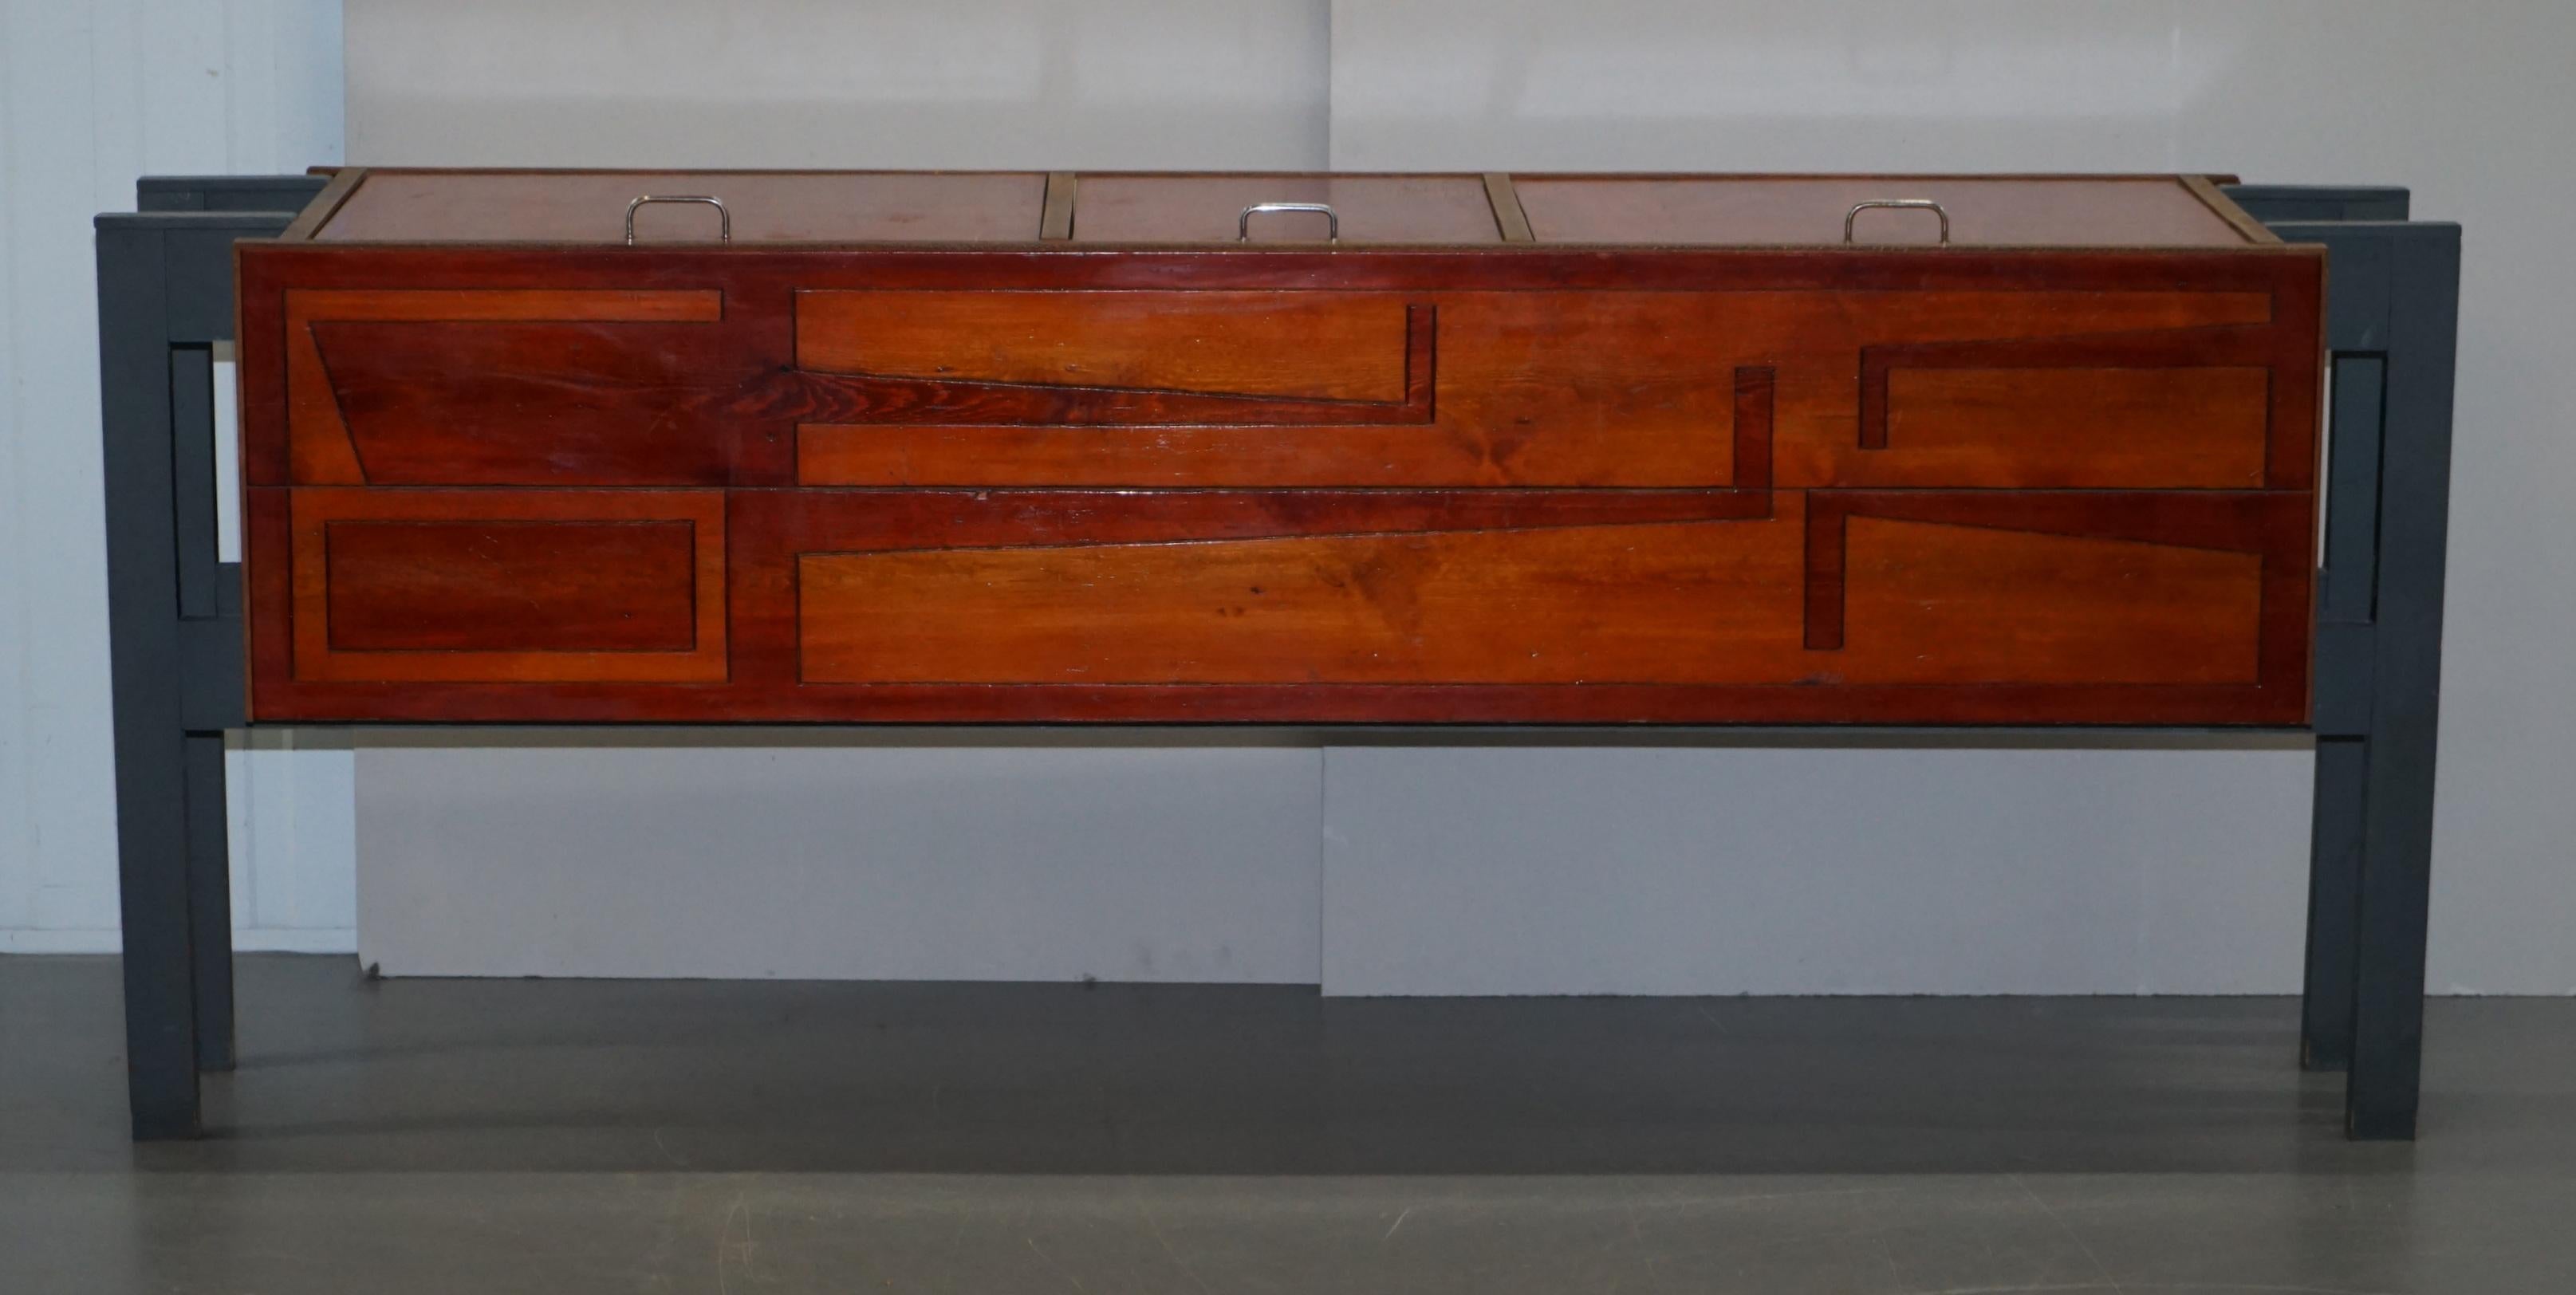 We are delighted to offer for sale this very interesting and stylish Art Modern sideboard which has been custom made

A very artist and creative piece, the style is like nothing I have ever seen, its very appealing. The doors all open upwards to